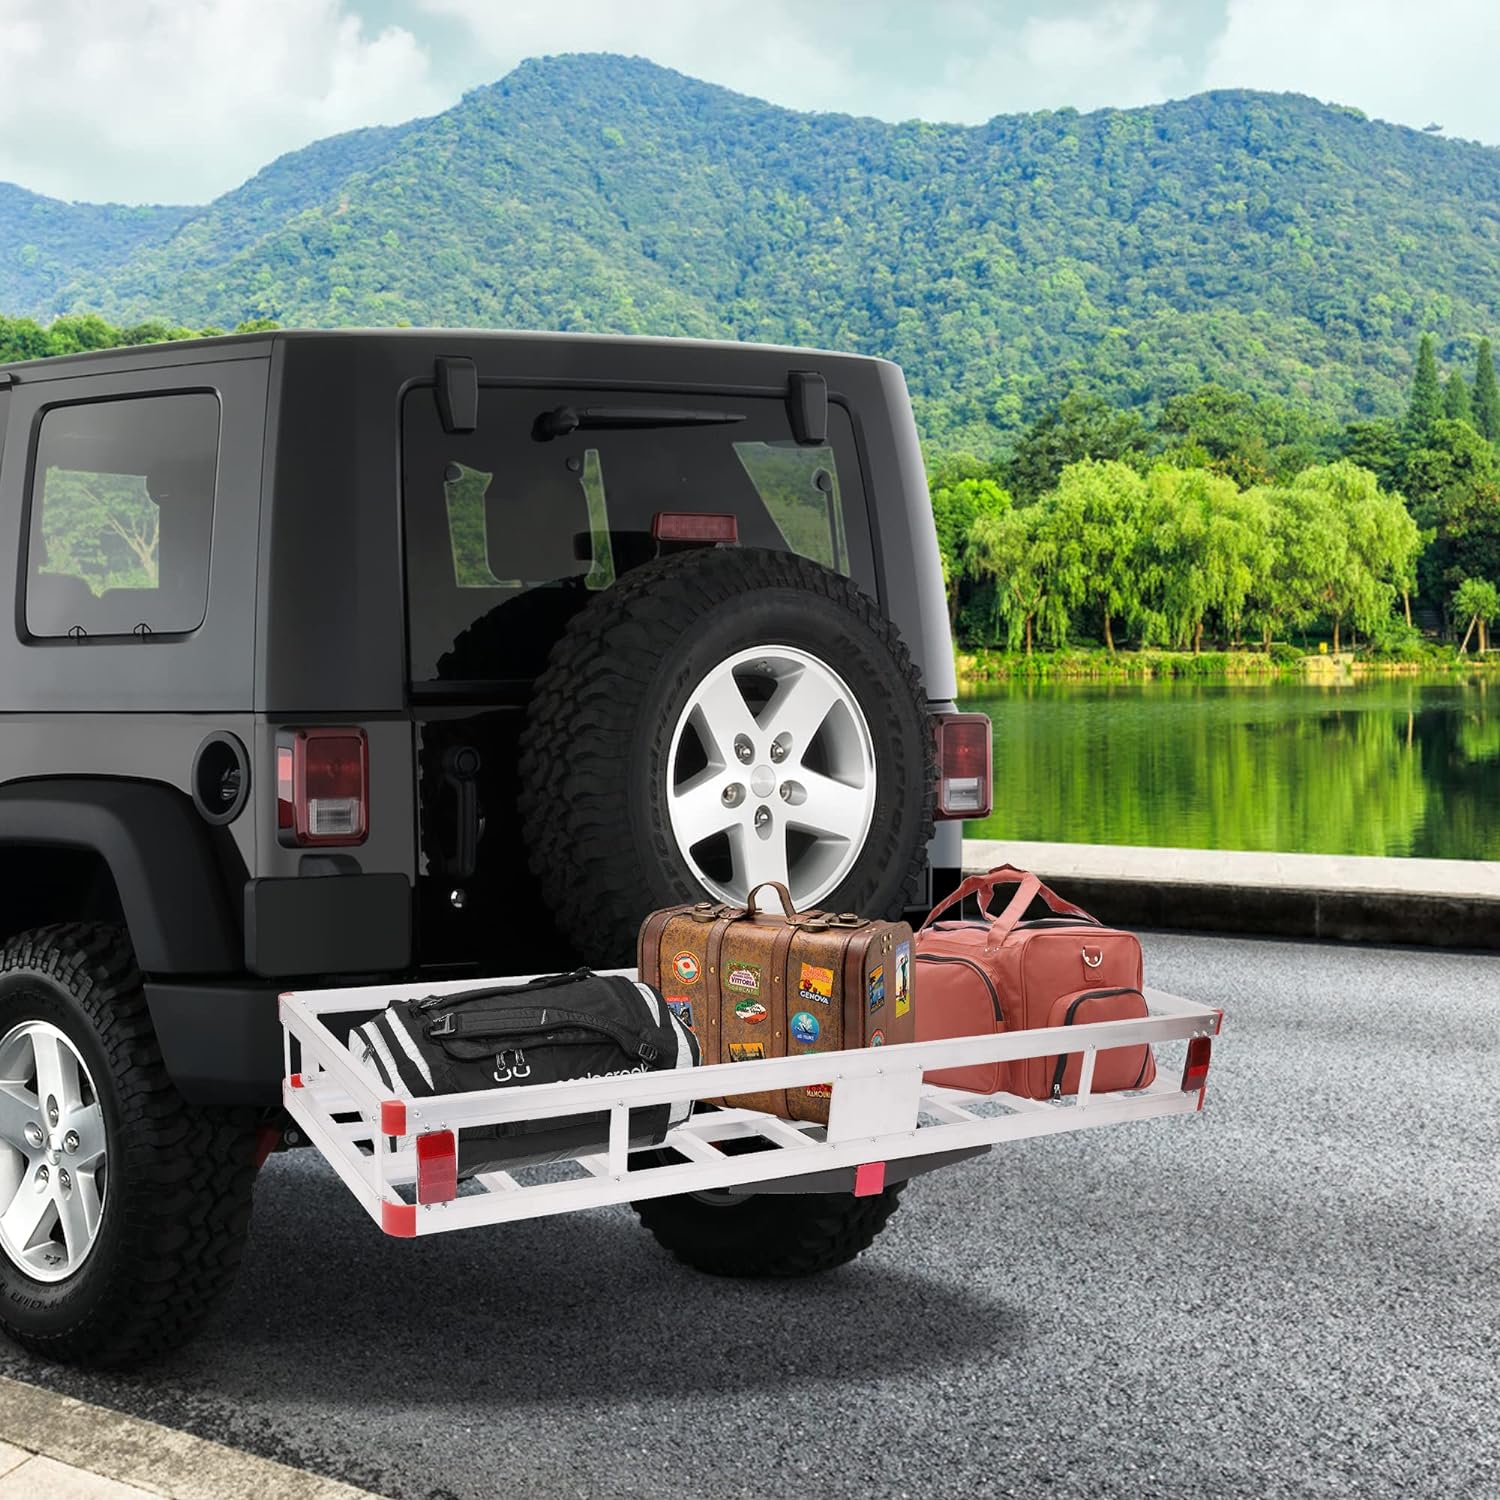 60" x 22" Aluminum Hitch Mounted Cargo Carrier, Car Back Hitch Cargo Carrier Luggage Basket Capacity Basket Trailer